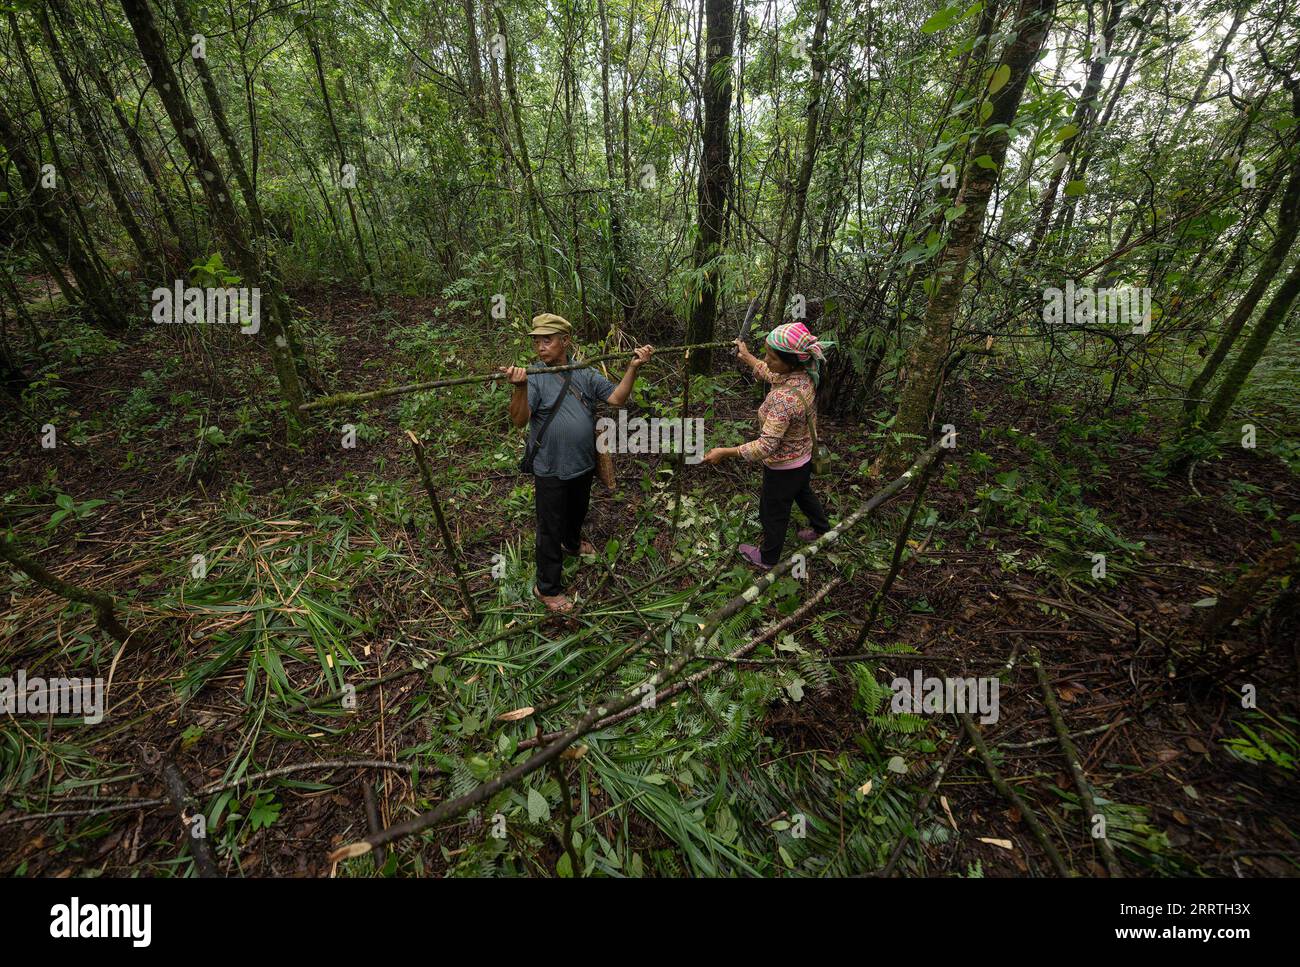 230726 -- JINPING, July 26, 2023 -- Zhang Puzhong L and his wife Wang Suying build a shed with banana leaves in the forest near Xiaxinzhai Village, Zhemi Township, Jinping County, Honghe Hani and Yi Autonomous Prefecture, southwest China s Yunnan Province, July 23, 2023. After days of thinking, Zhang Puzhong decided to do something instructive to his grandchildren: bring them back to the forest he used to live as a child more than 60 years ago. This is very important. I know how happy I am today because I never forget how bitter my life was in the past, Zhang said. Zhang is a 70-year-old Kucon Stock Photo